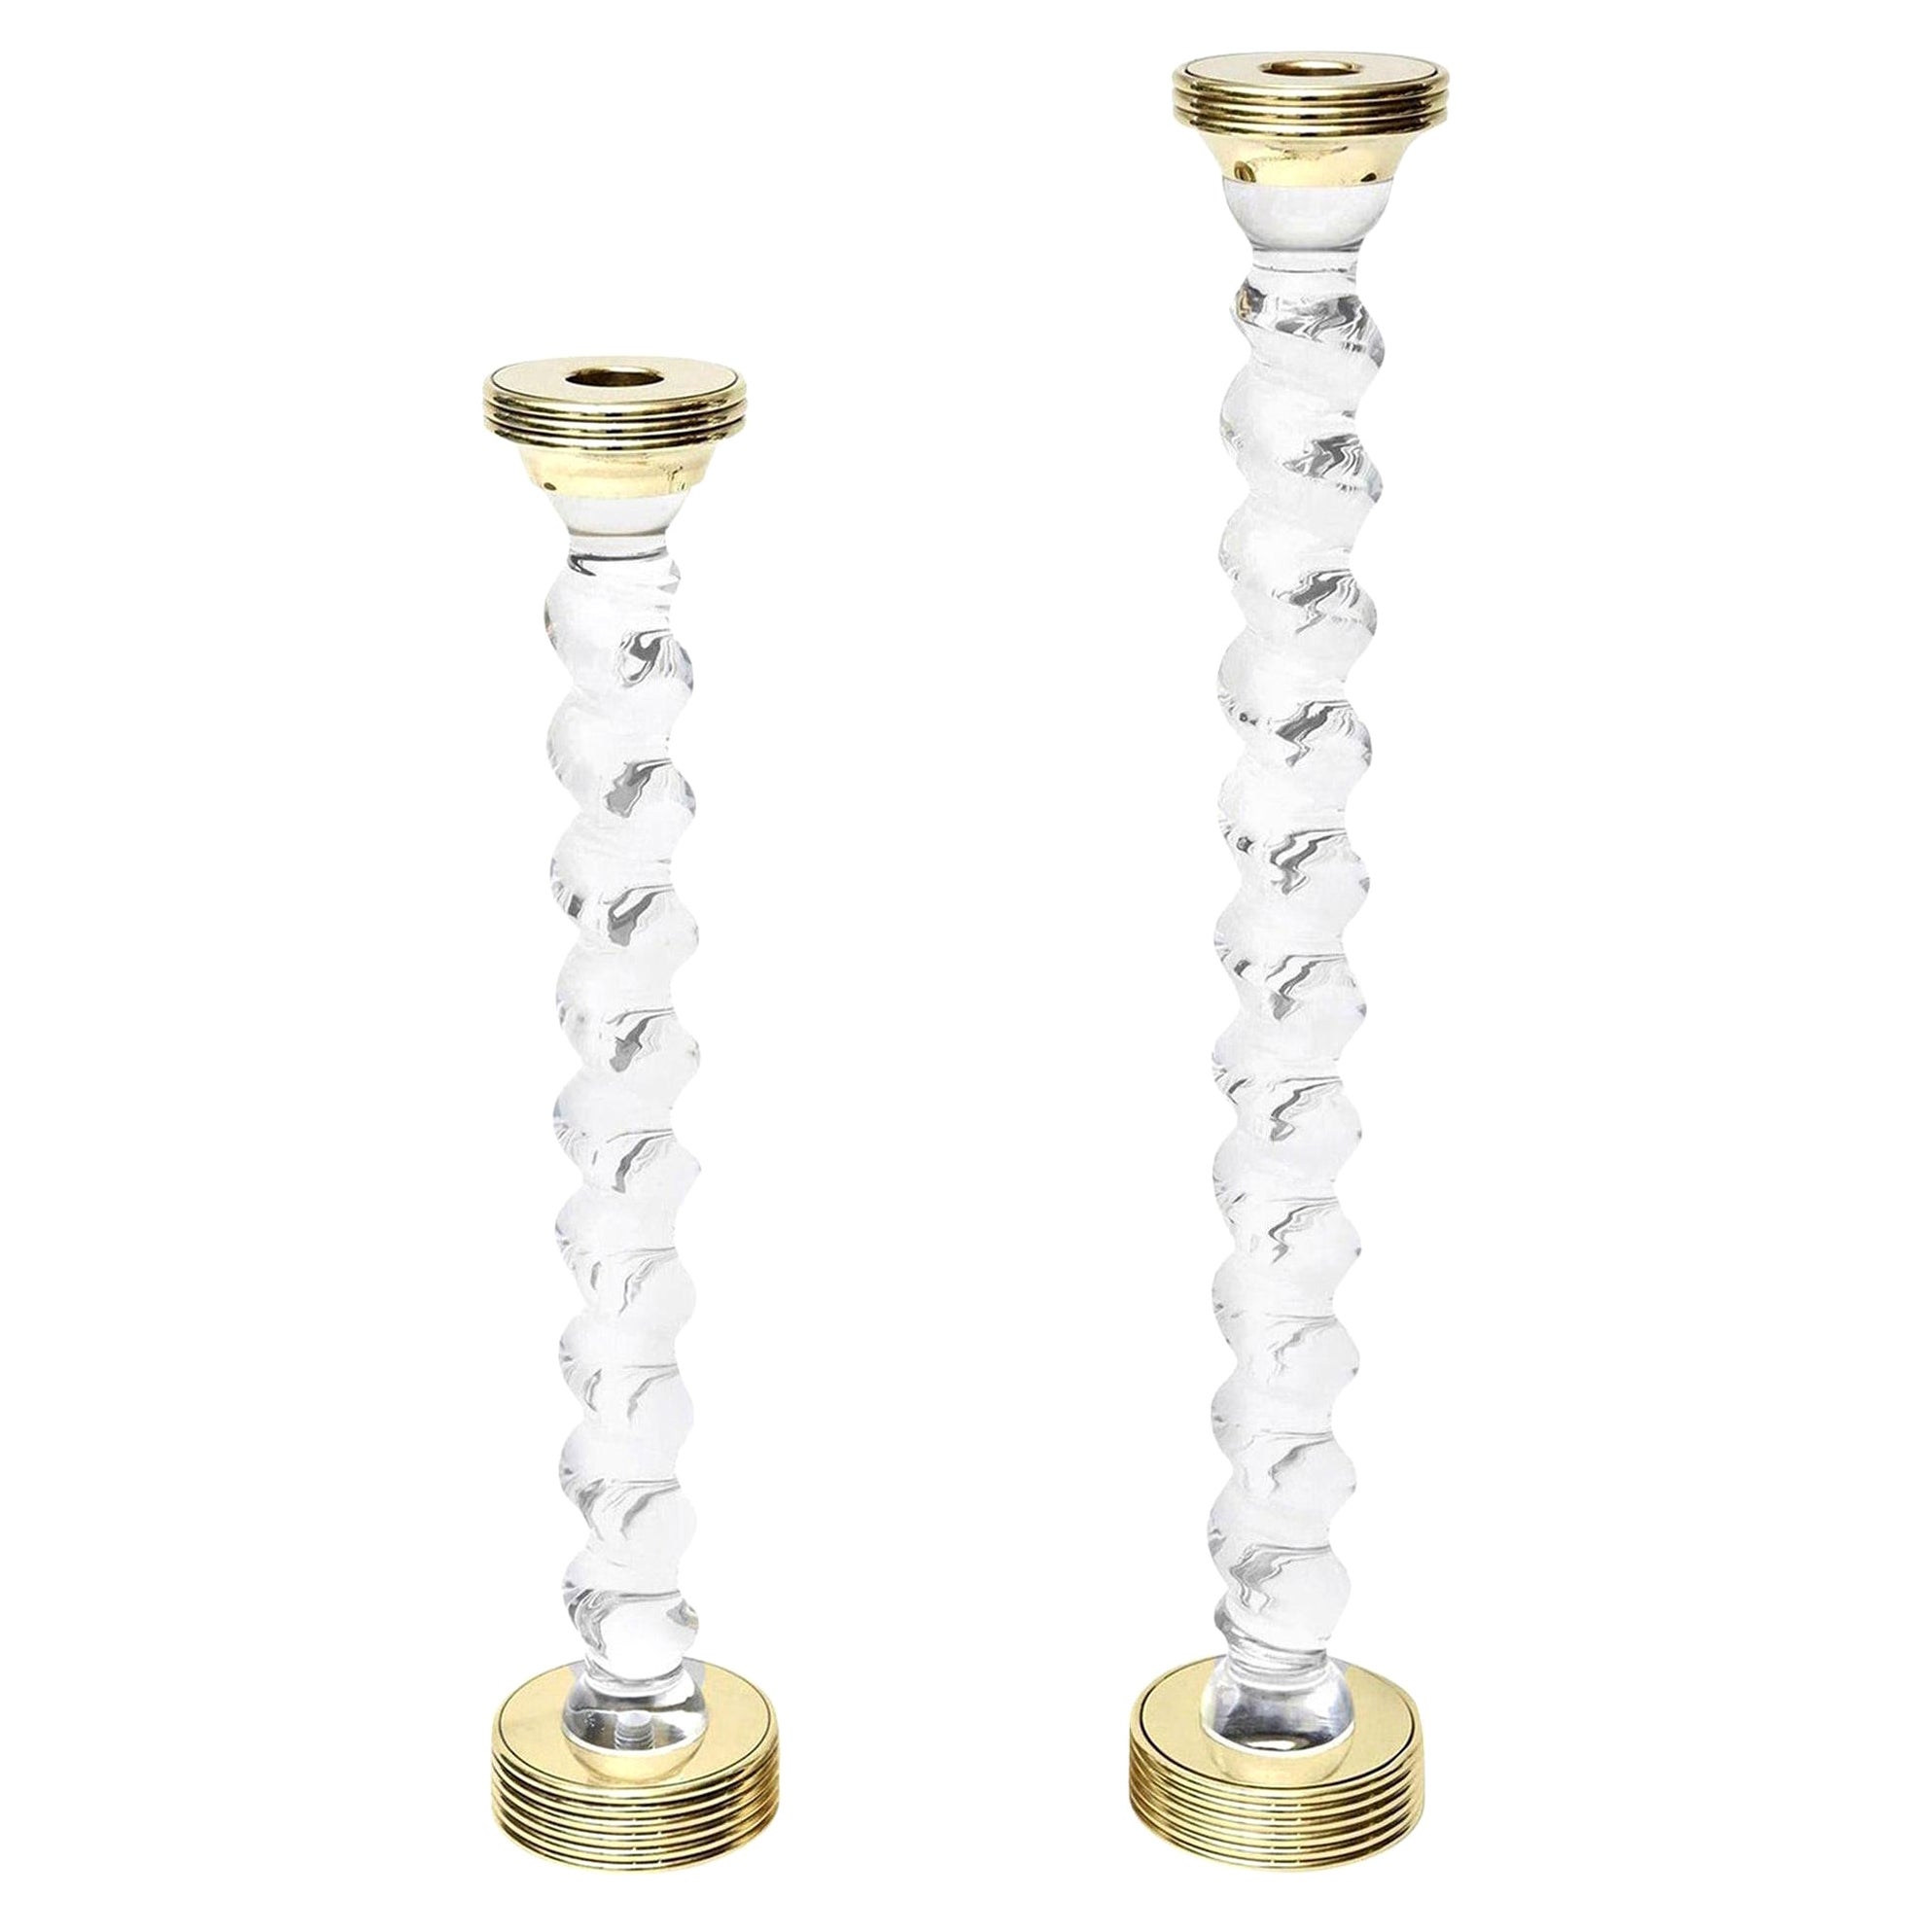 Vintage Rare Brass and Twisted Lucite Monumental Candlesticks Pair Of For Sale